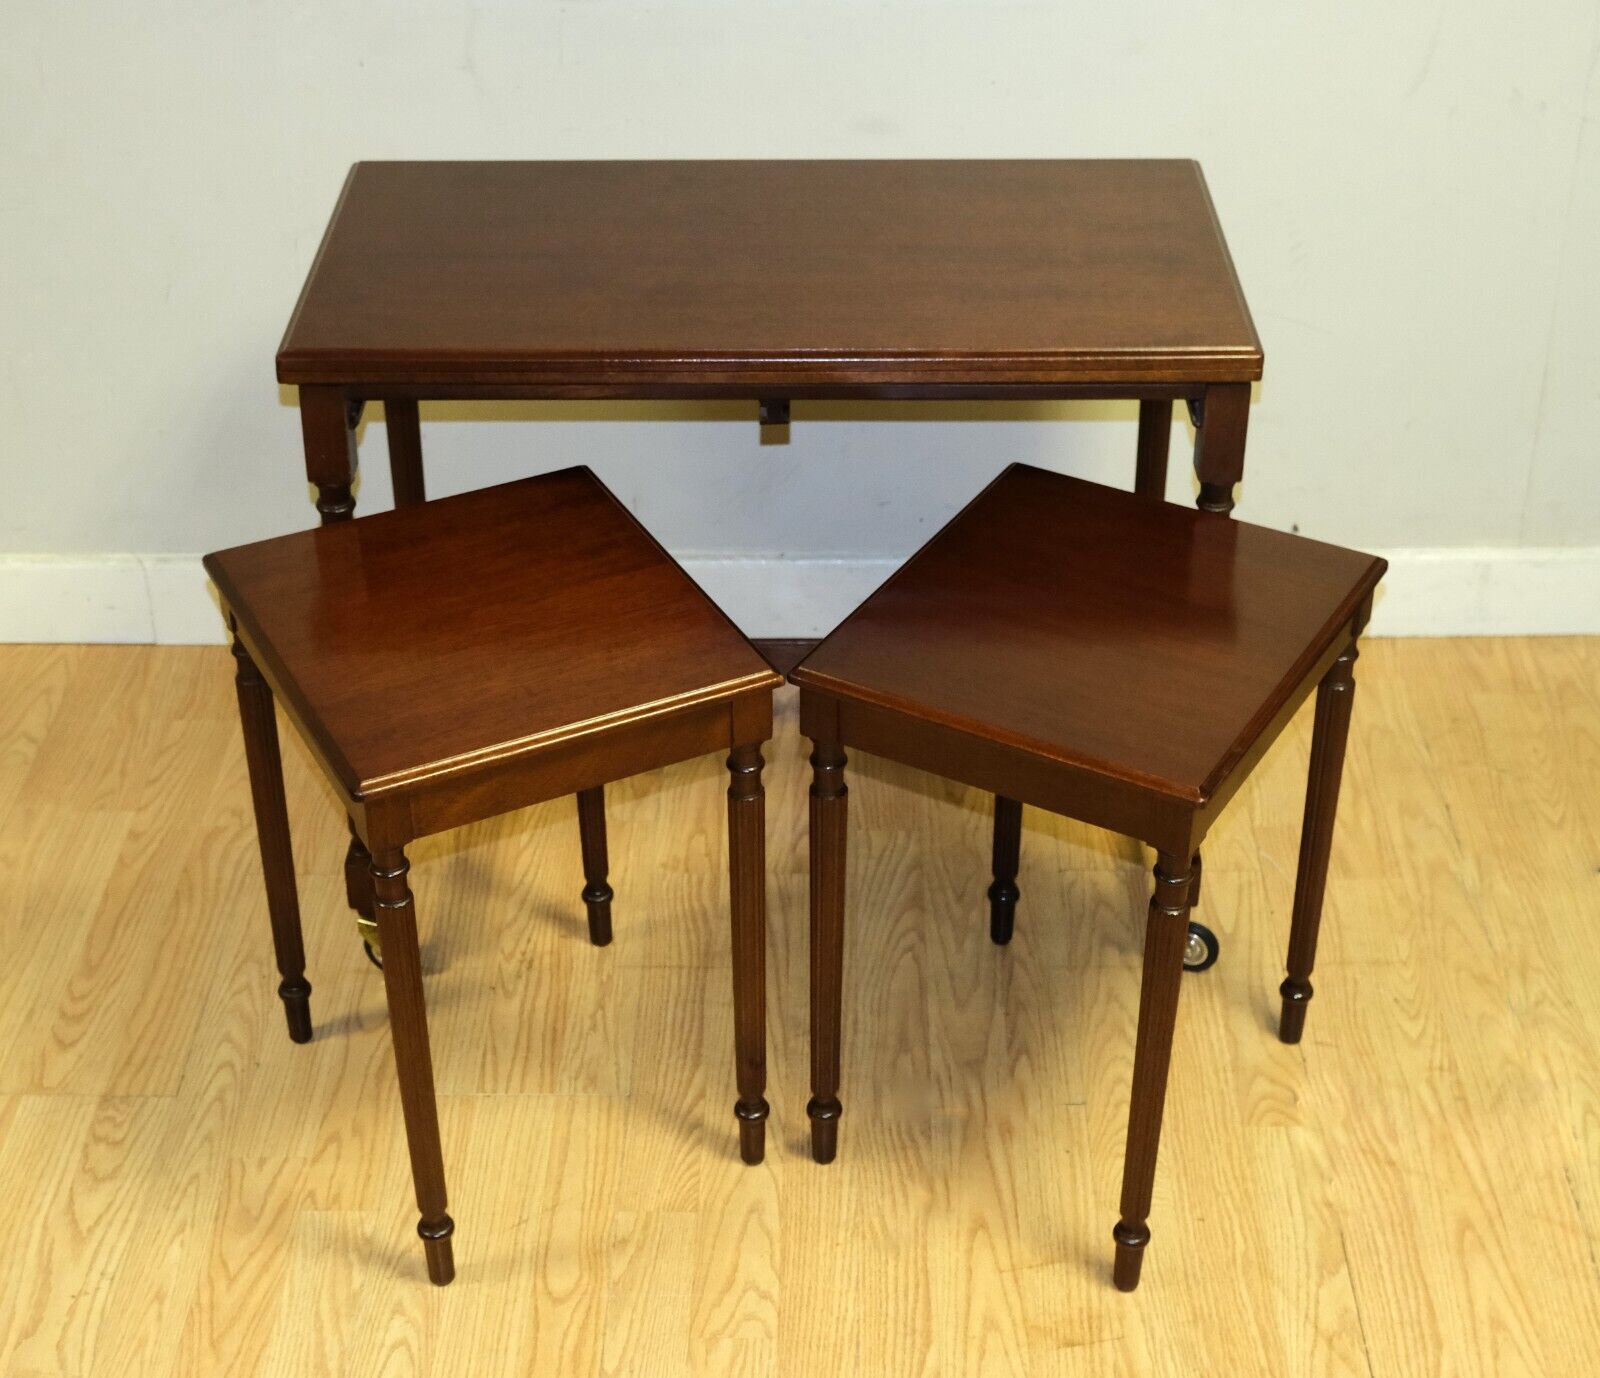 We are delighted to offer for sale this lovely Vintage Metamorphic mahogany nest of tables raised on castors.

This beautiful set offers you a medium-sized table that opens up to a doubled-top space. Along with a lovely pair of side tables, that are